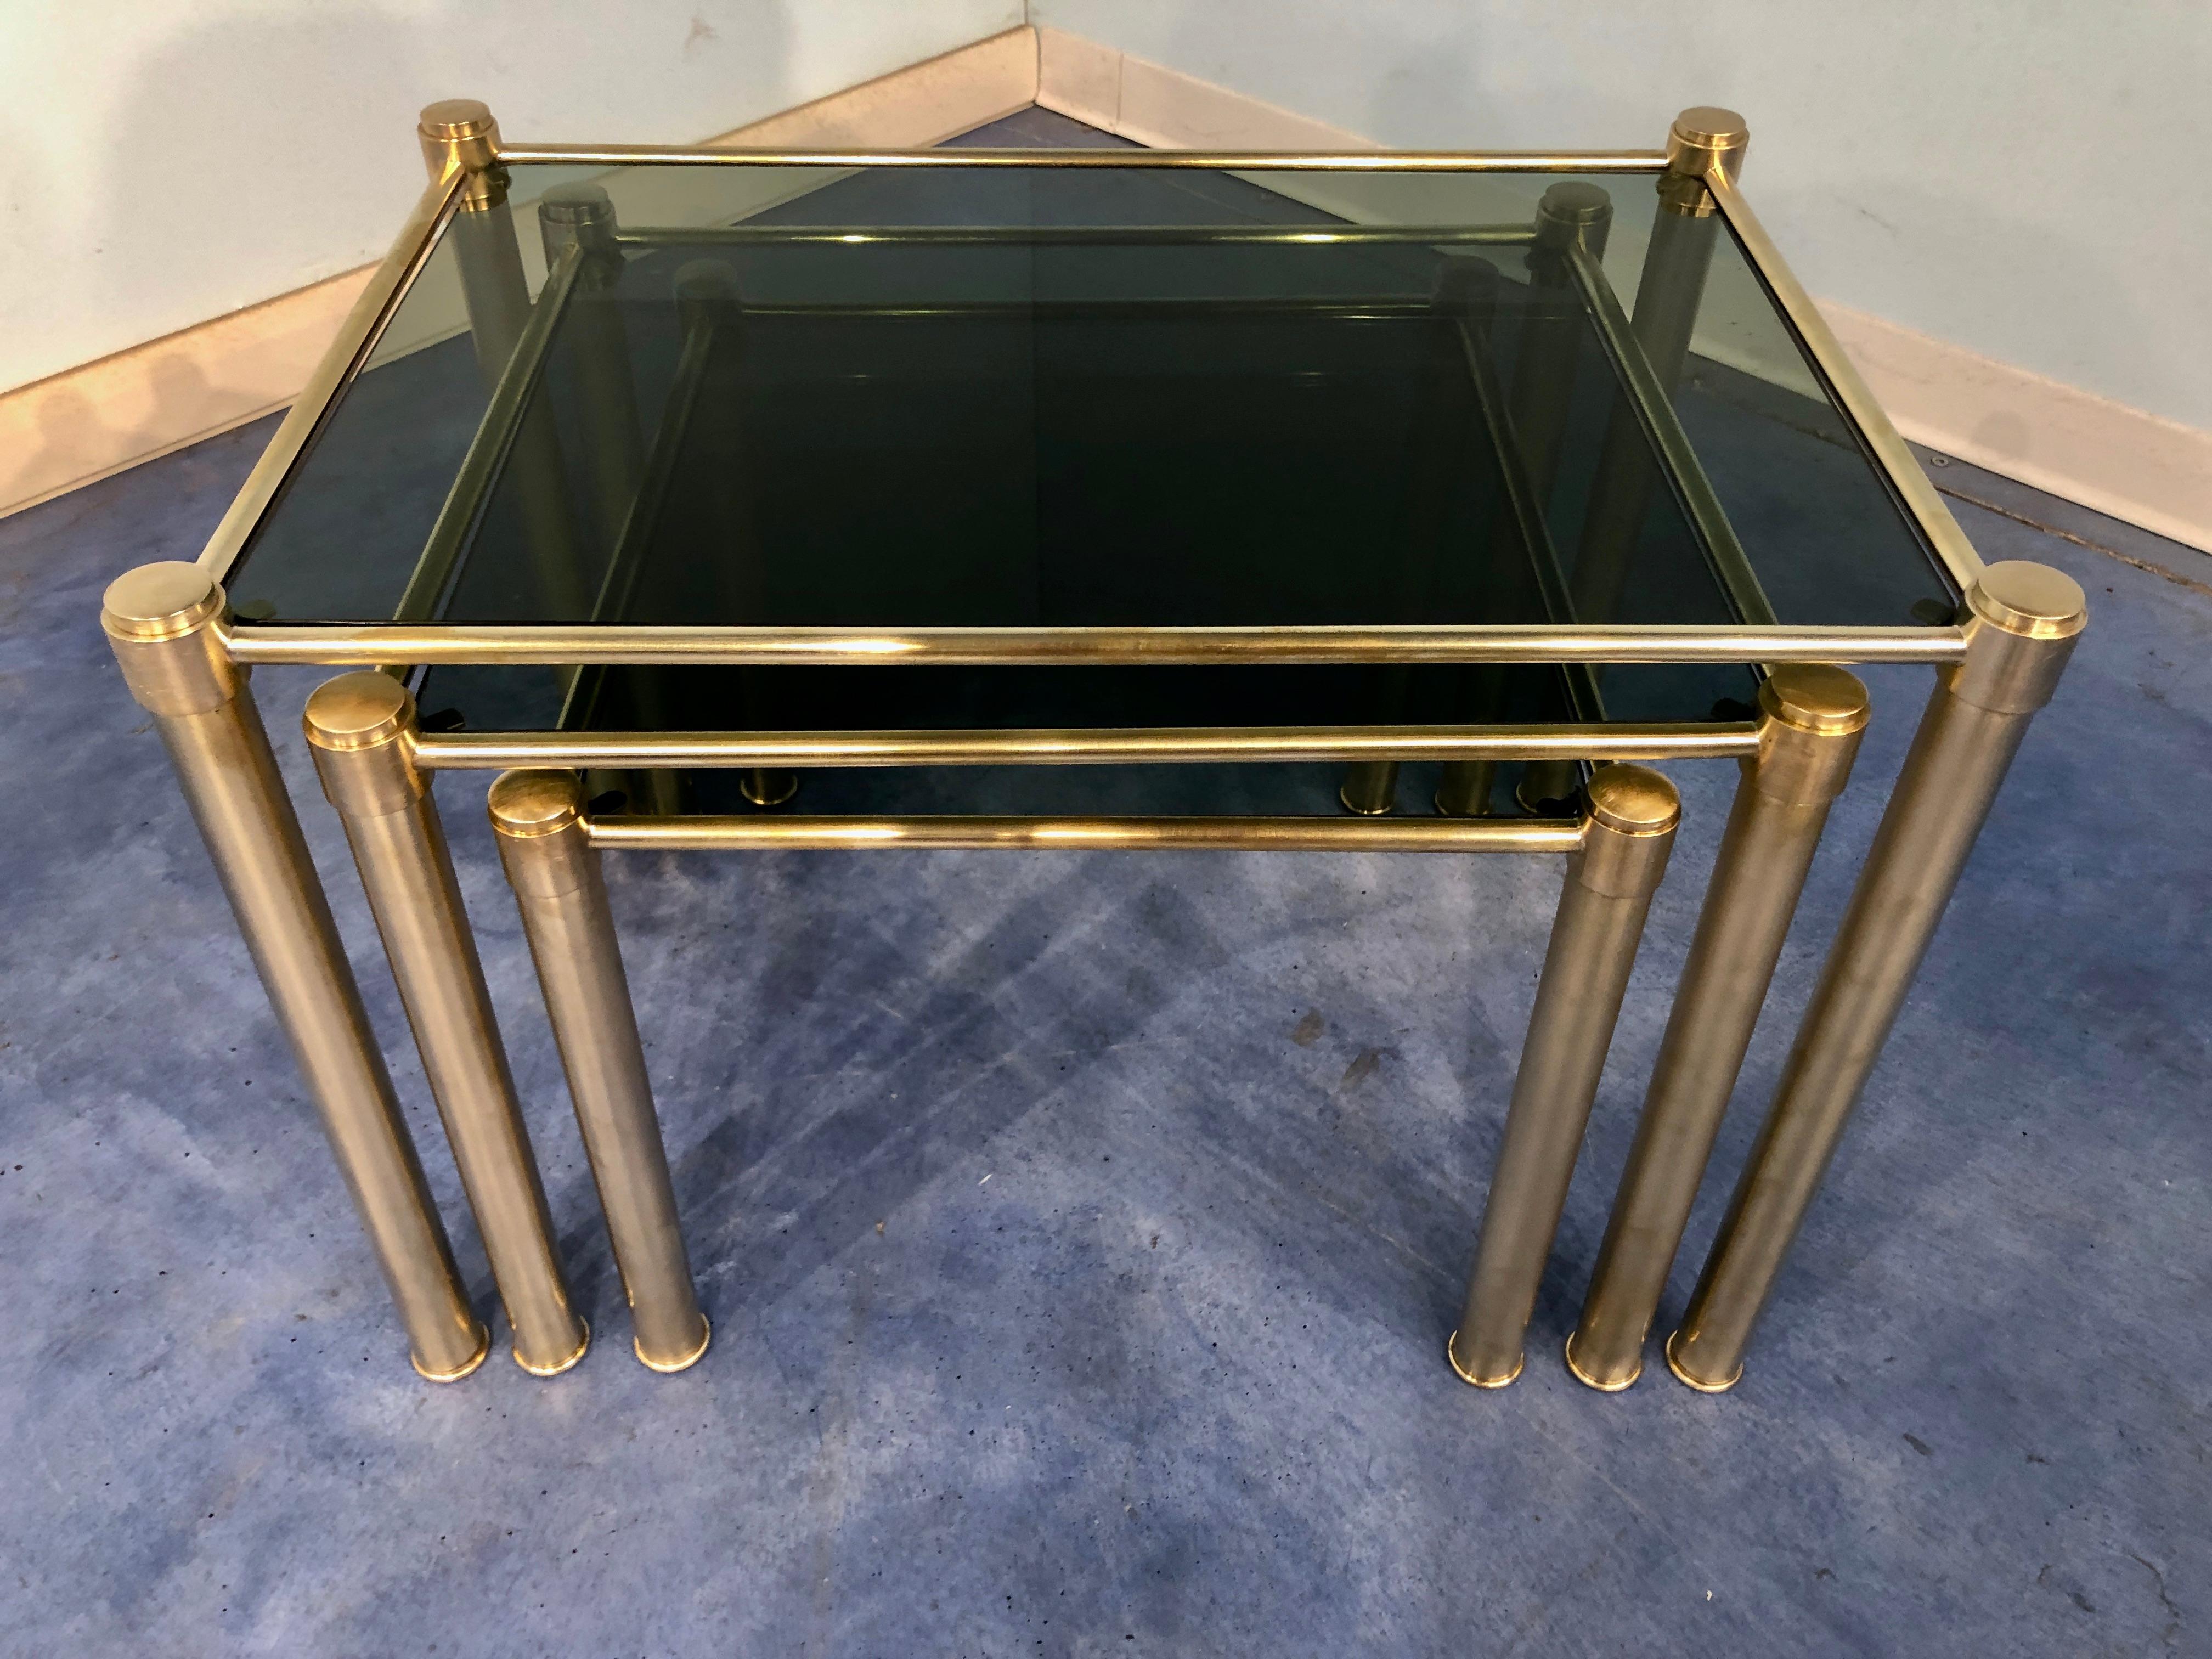 Stylish Italian Mid-Century Modern nesting tables in brass with smoked glass from the 1970s. Perfect for coffee, cocktails, and more. In very good original conditions, ready to use.